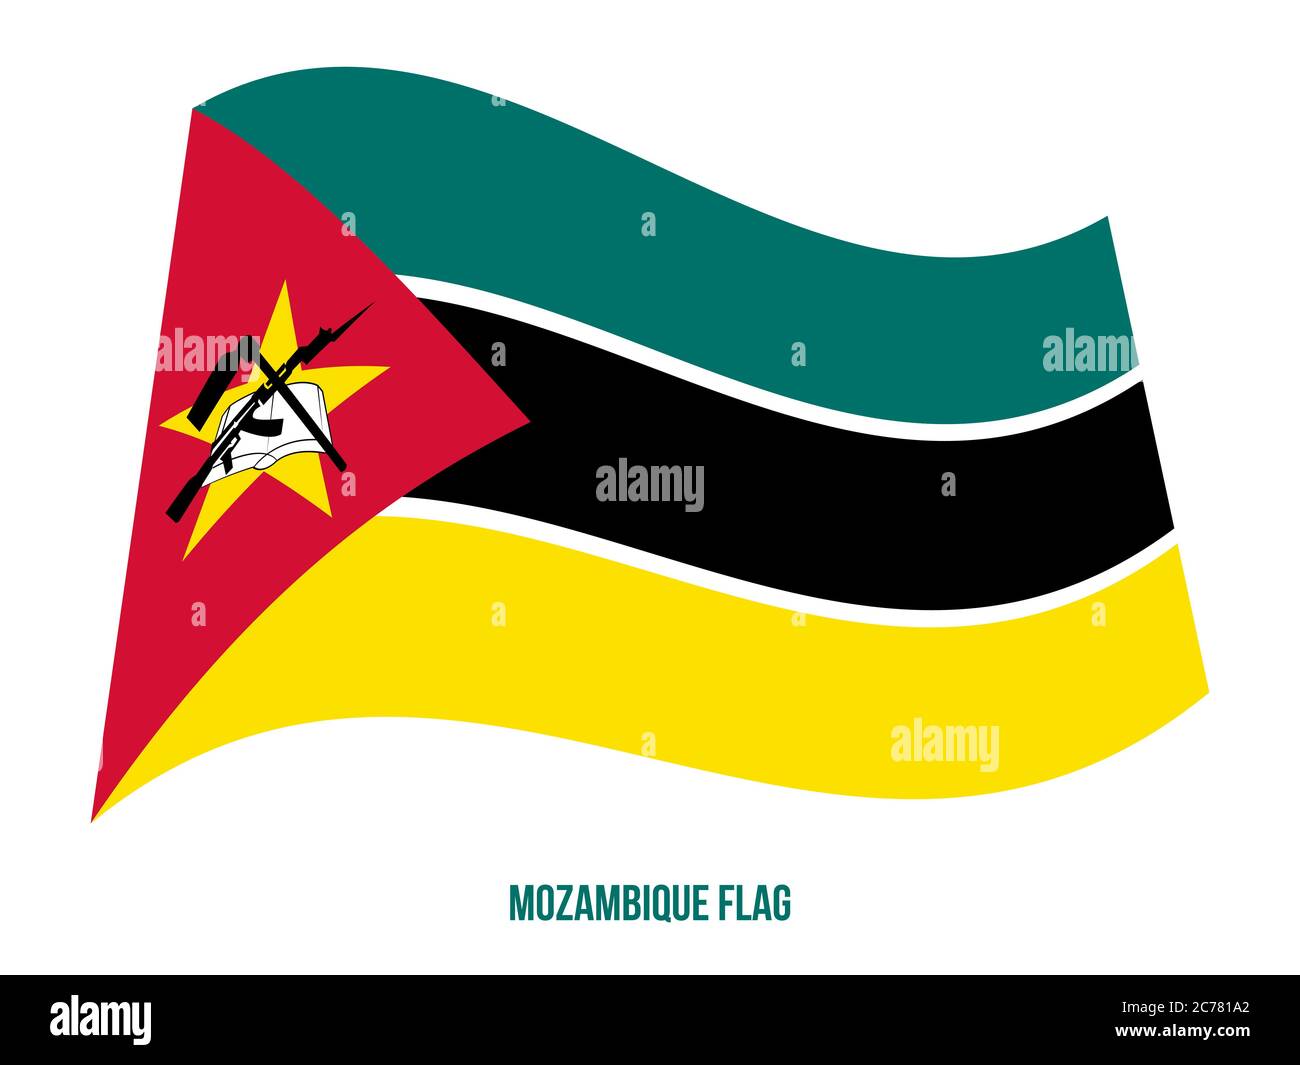 Mozambique Flag Waving Vector Illustration on White Background. Mozambique National Flag. Stock Vector